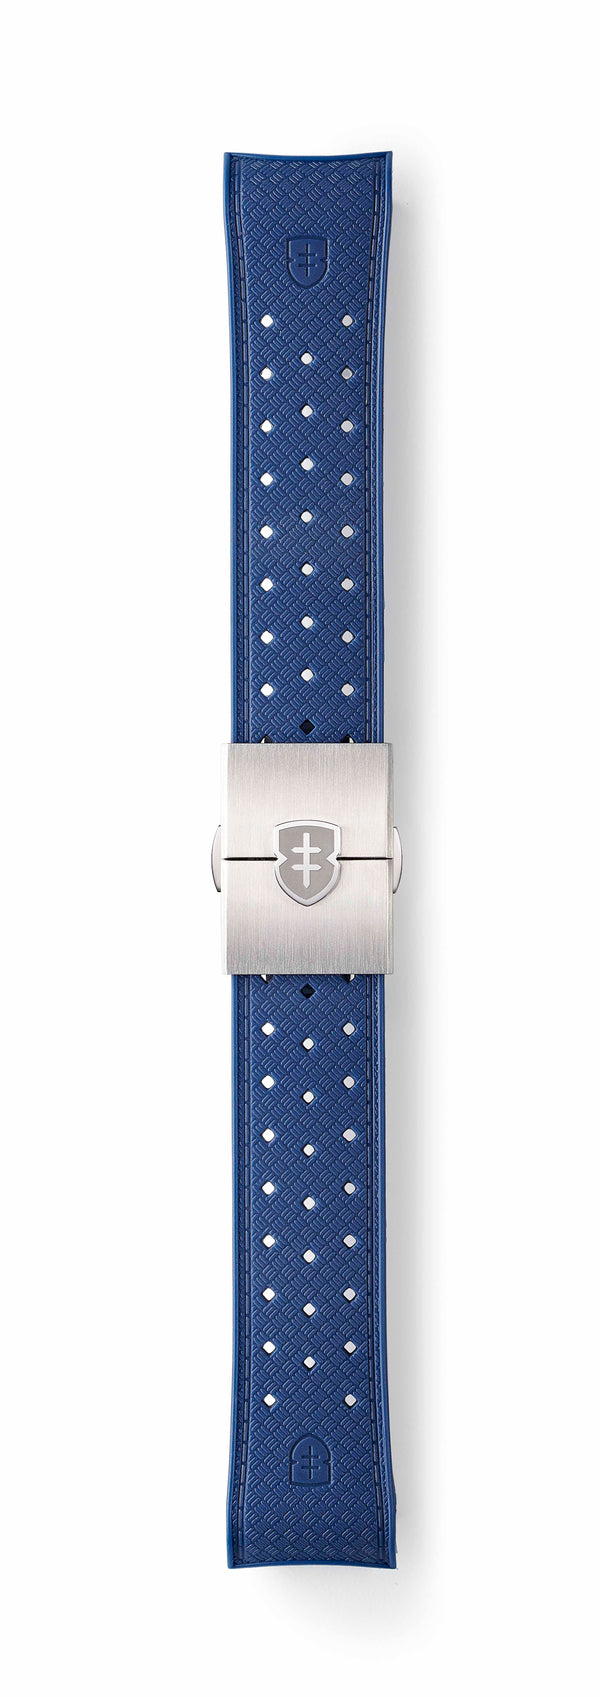 STR-R53: Chalky Blue Textured Rubber Strap with Deployant Buckle